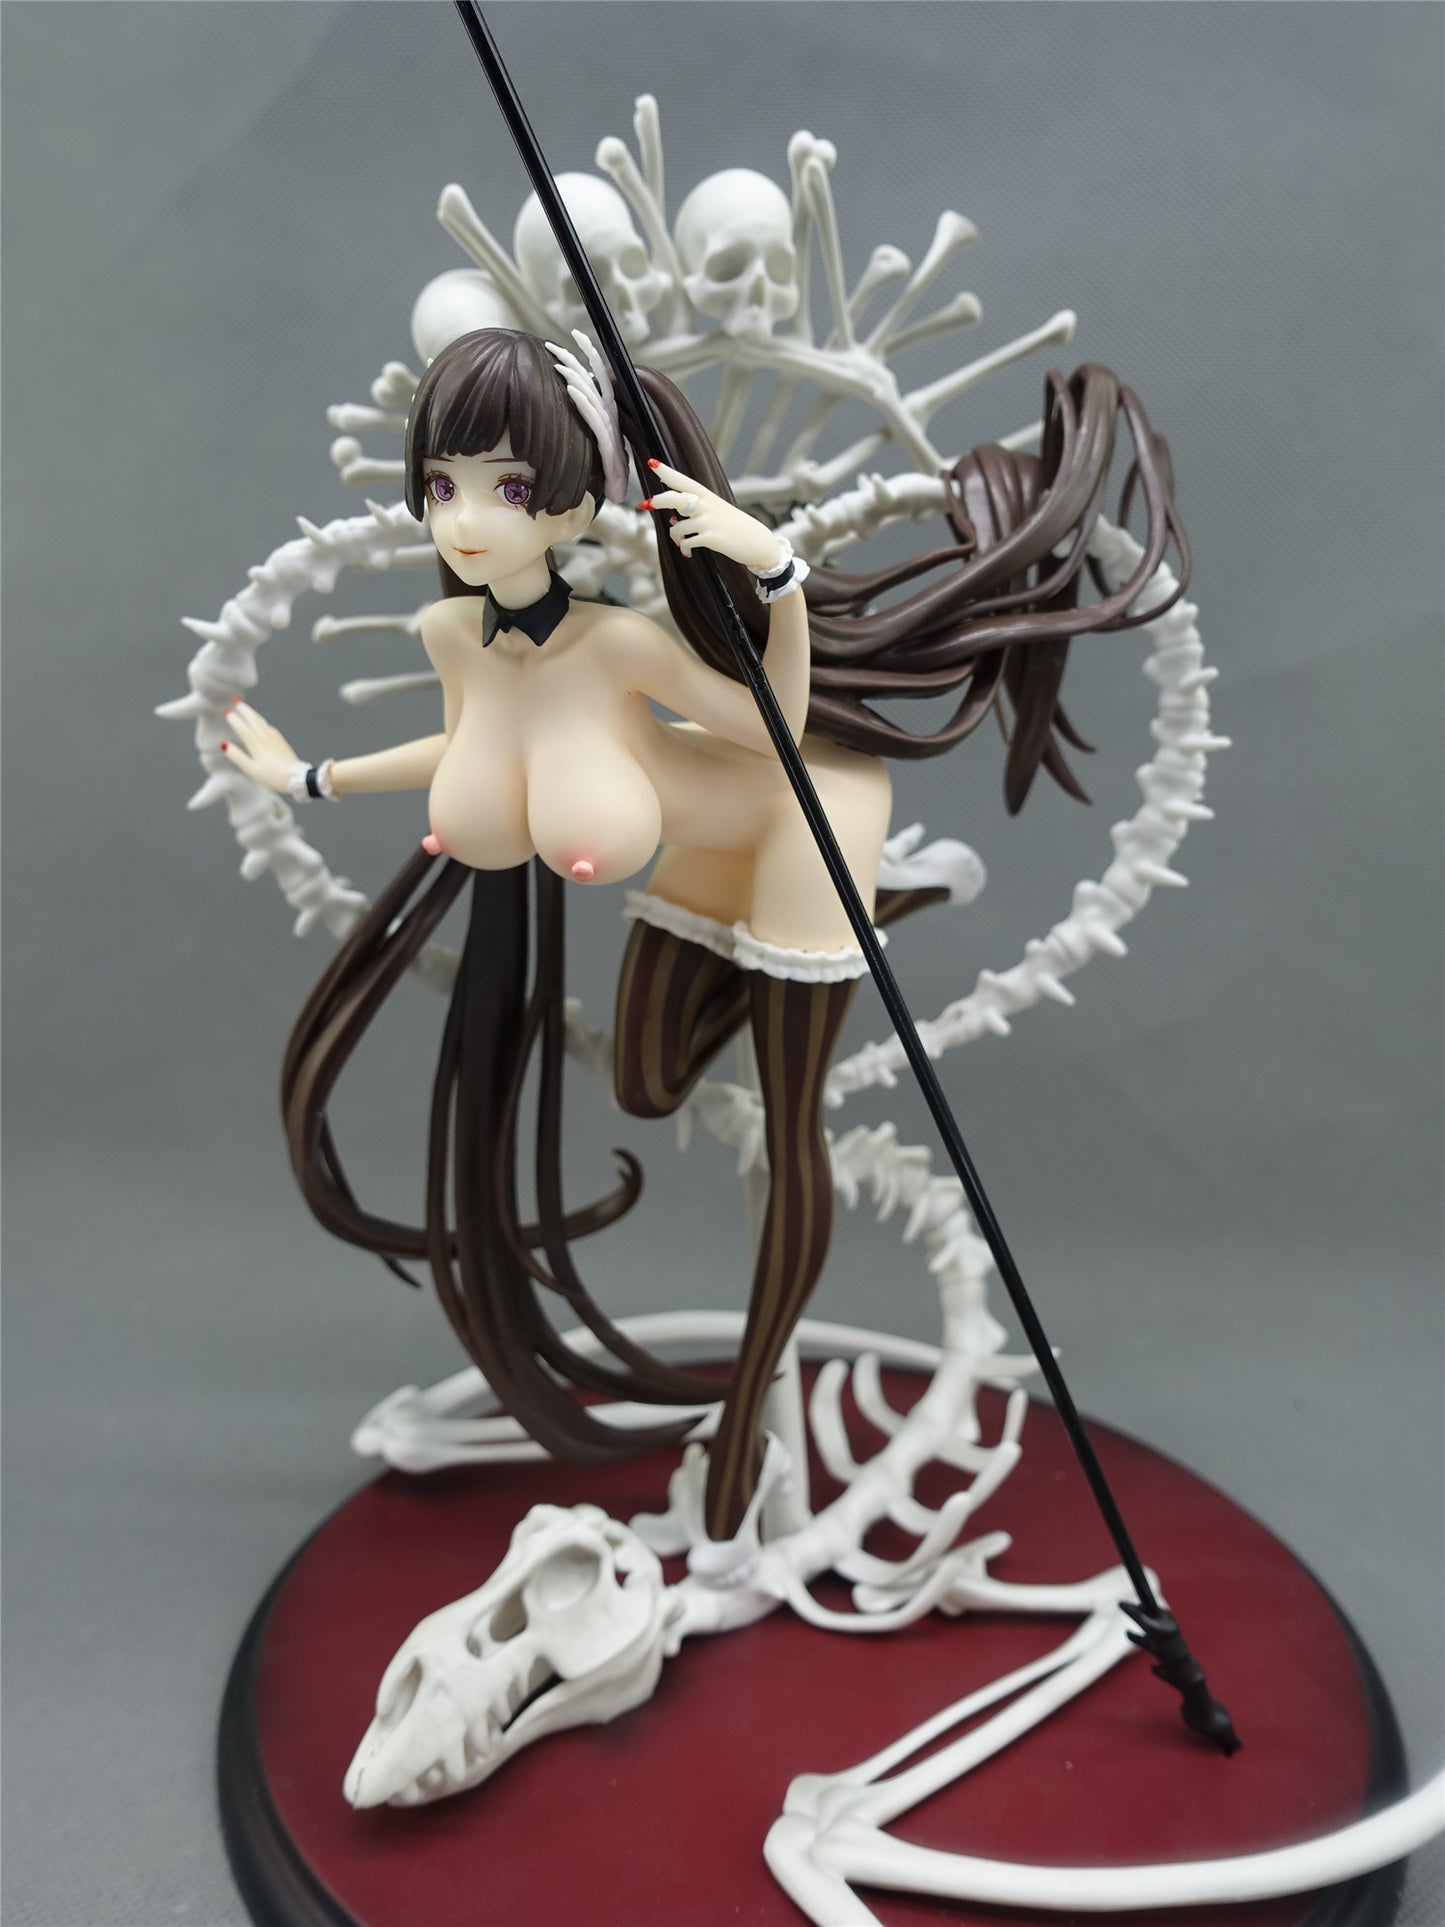 Myethos - Wisteria Night Hag Lilith 1/8 naked anime figure sexy collectible action figures